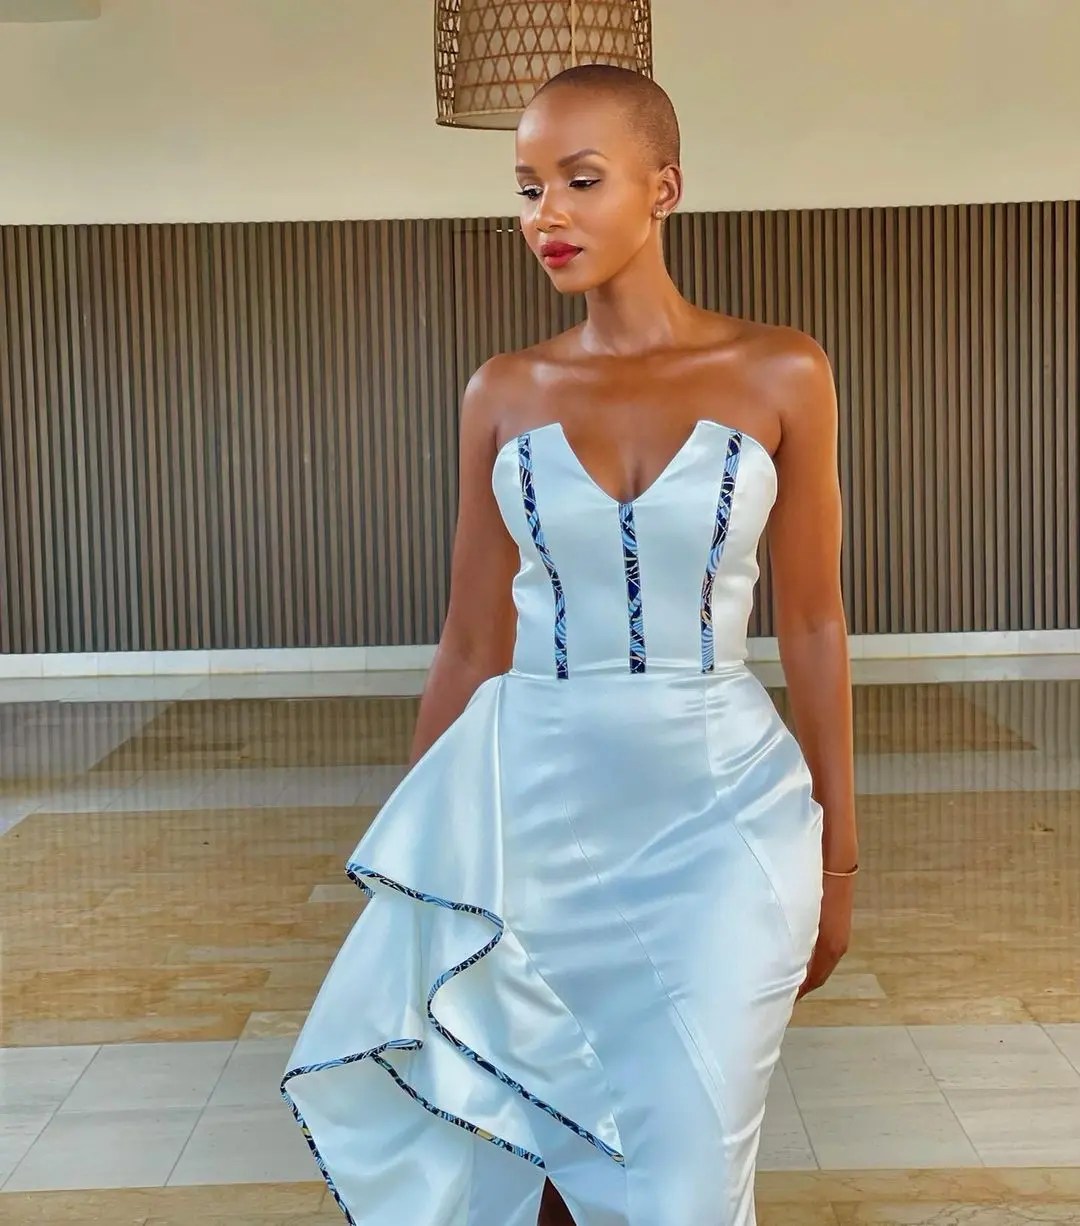 Shudu Musida begs Mzansi for votes to become Miss World